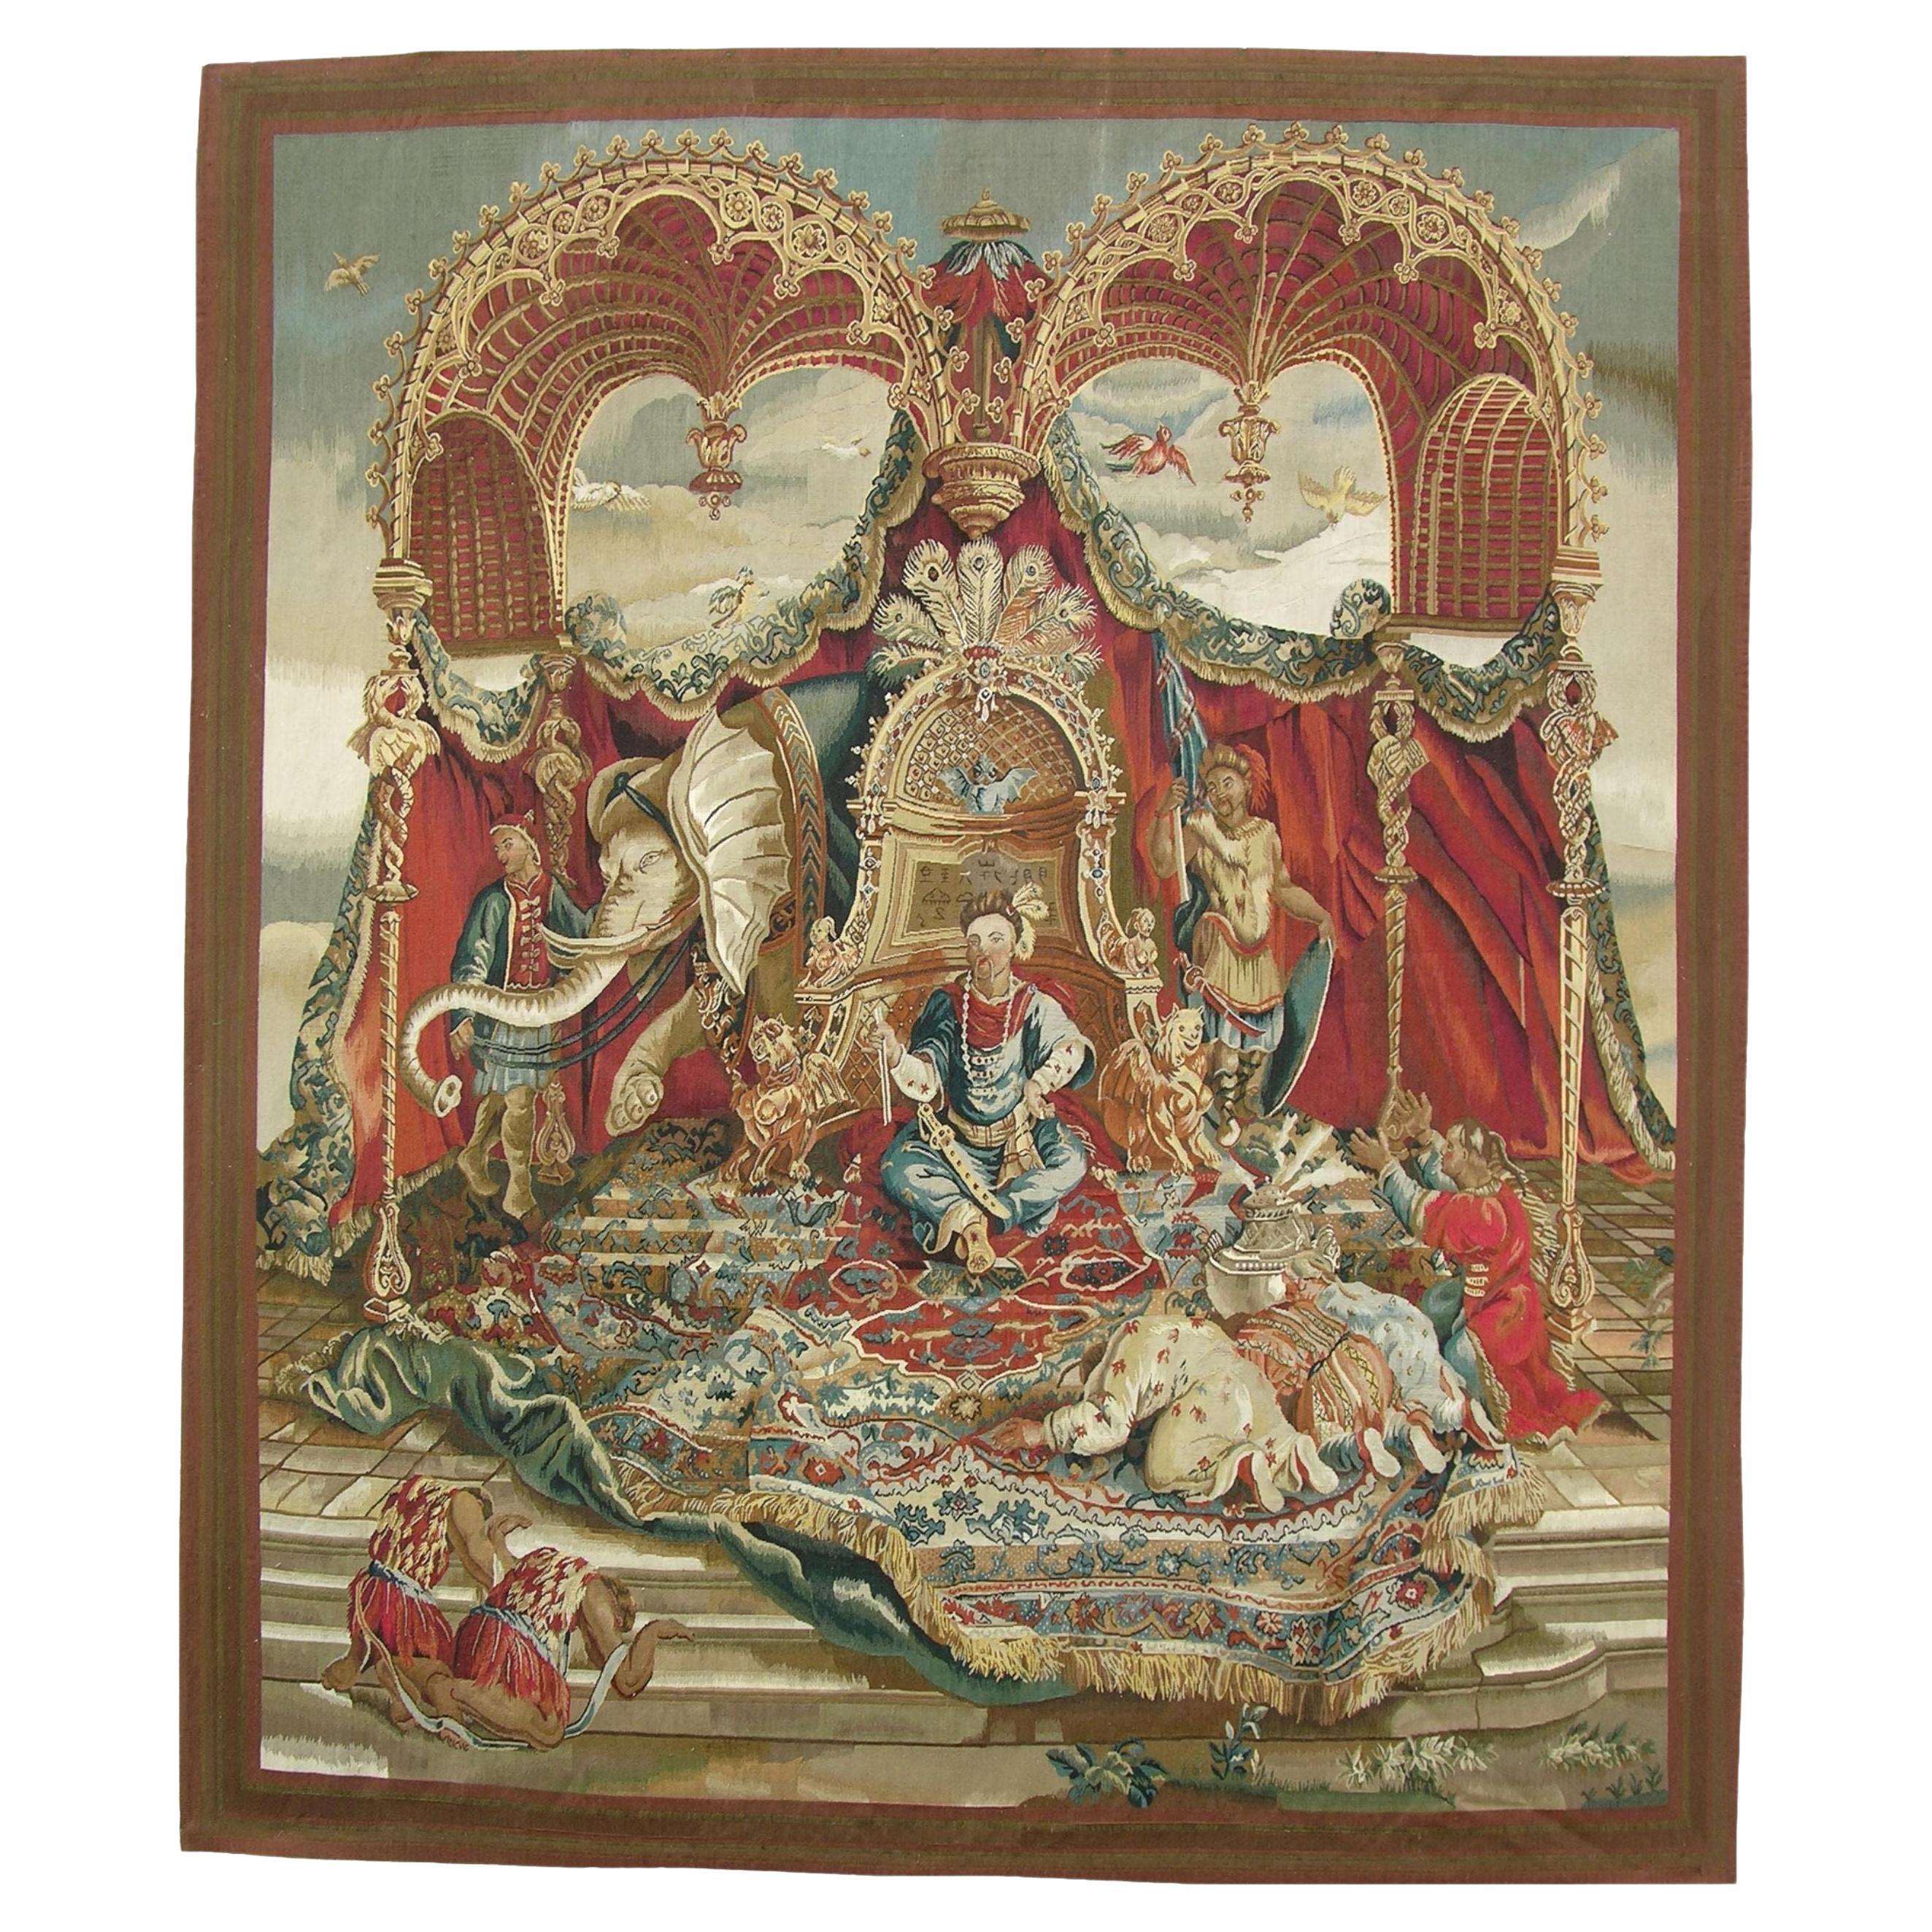 Vintage Tapestry Depicting King on the Throne 7'9" X 7'9" For Sale